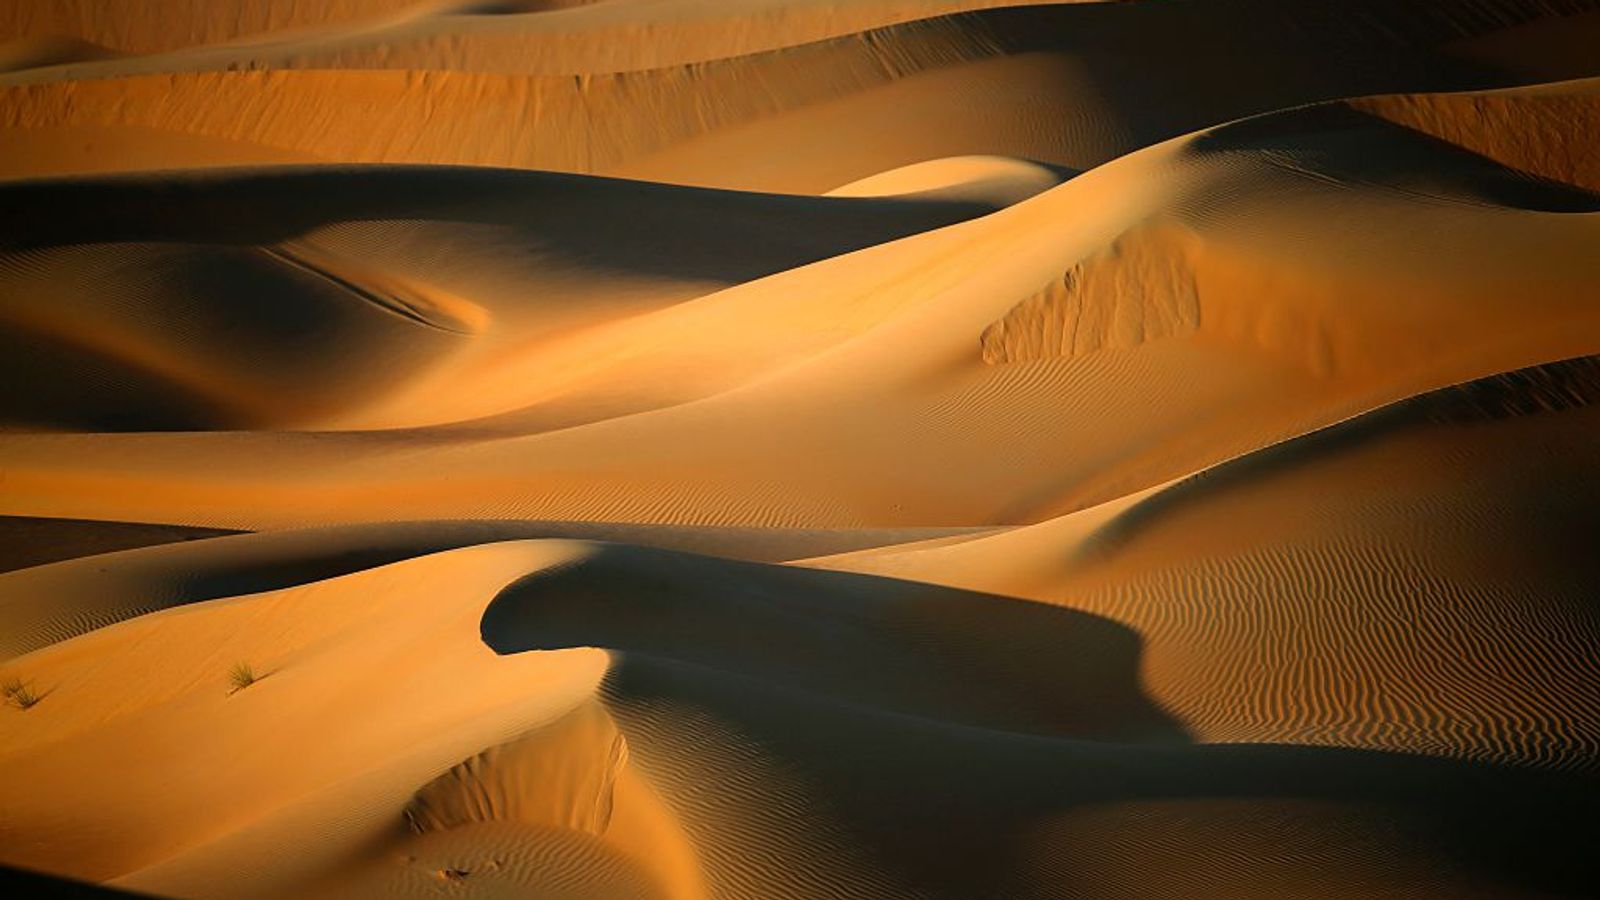 Sand dunes 'communicate' with each other - study